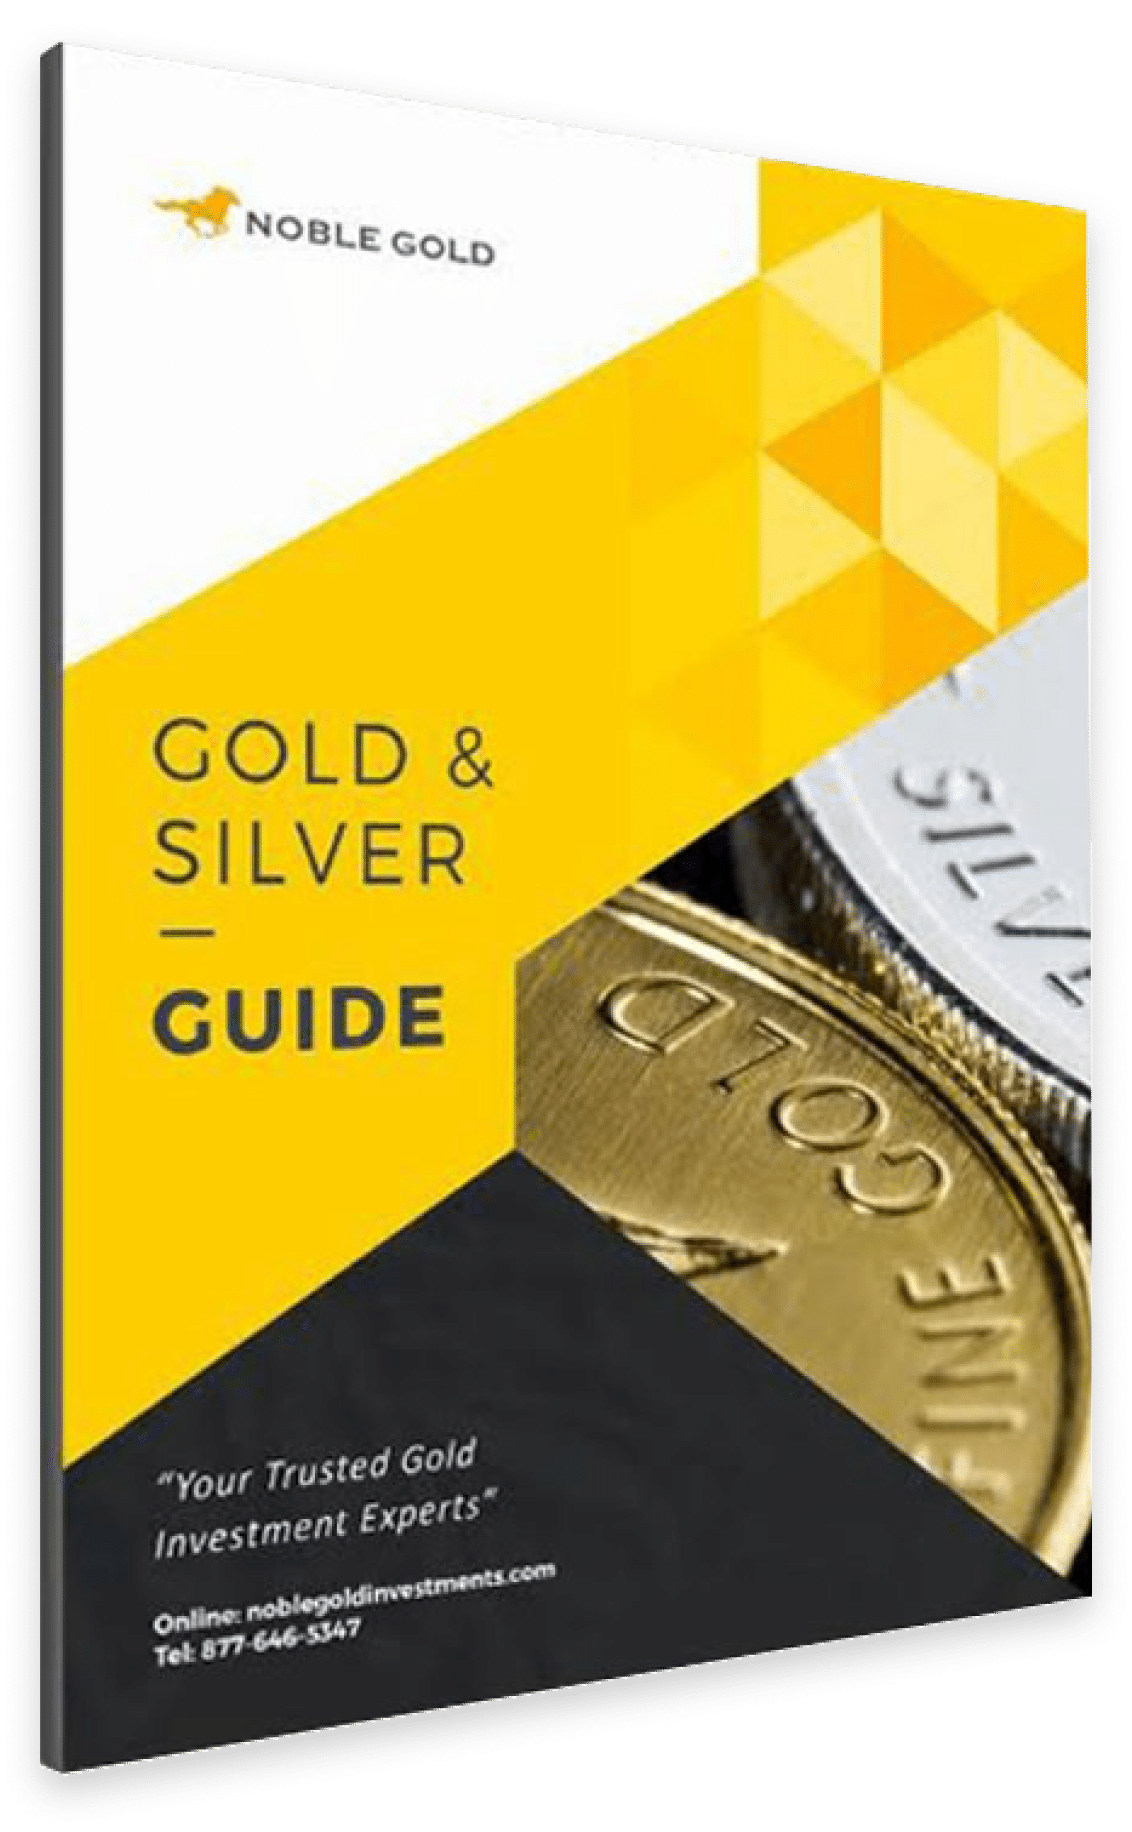 Need More Inspiration With silver ira? Read this!